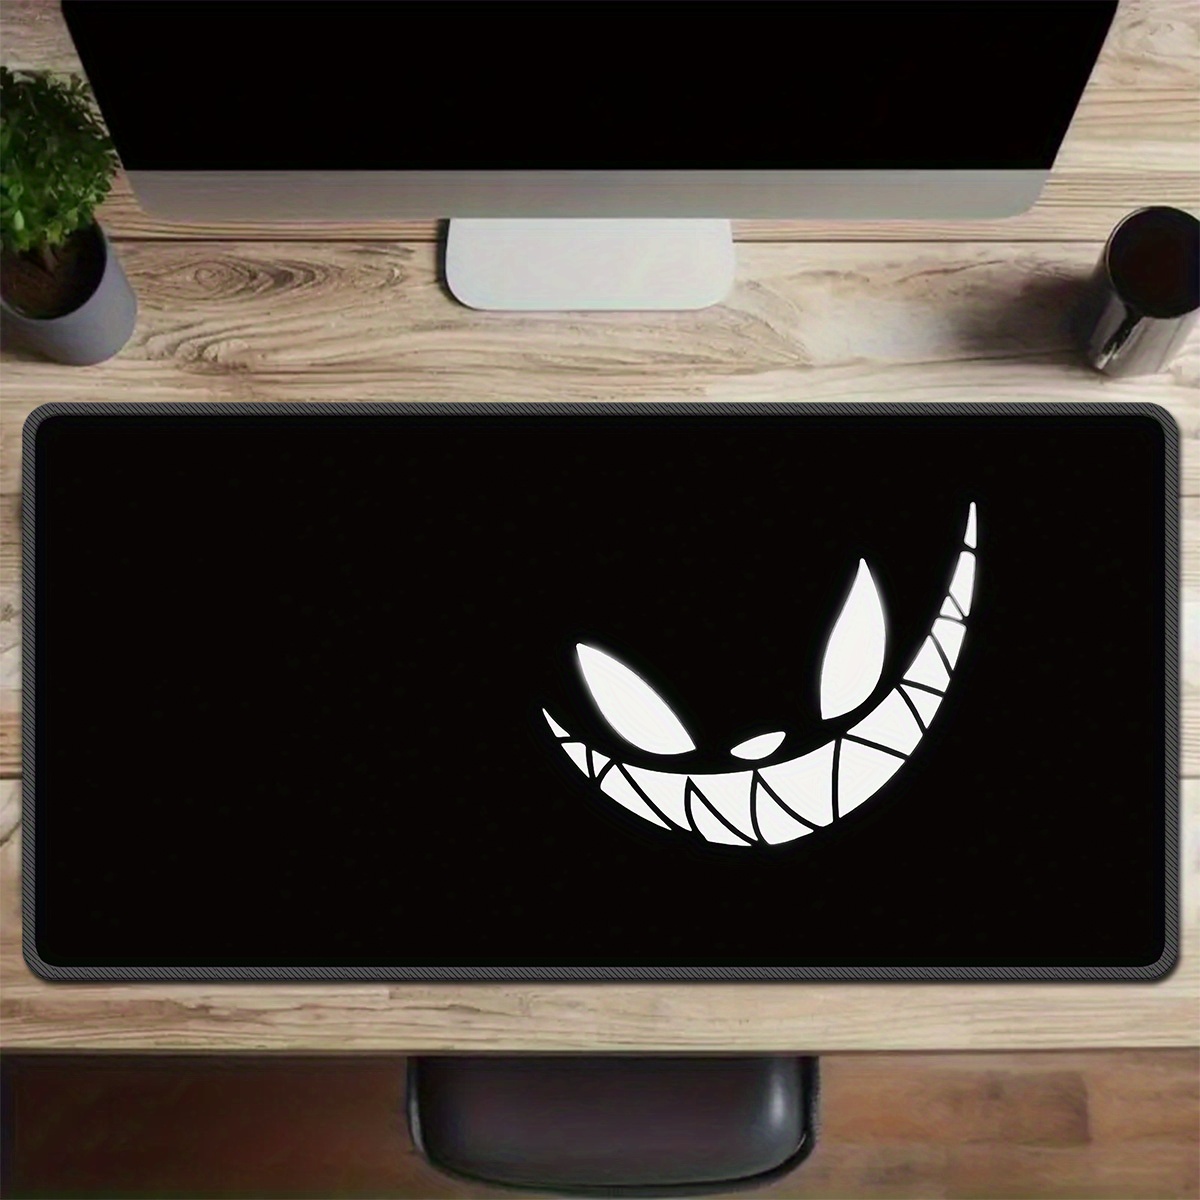 

Black Horror Happy Face Mouse Pad, Cartoon Anime Washable Non-slip Rubber Desk Keyboard Pad, Premium Rectangle Mat Laptop Pad, Thick Computer Desk Protector Magic Christmas Gift Valentine's Day Gift